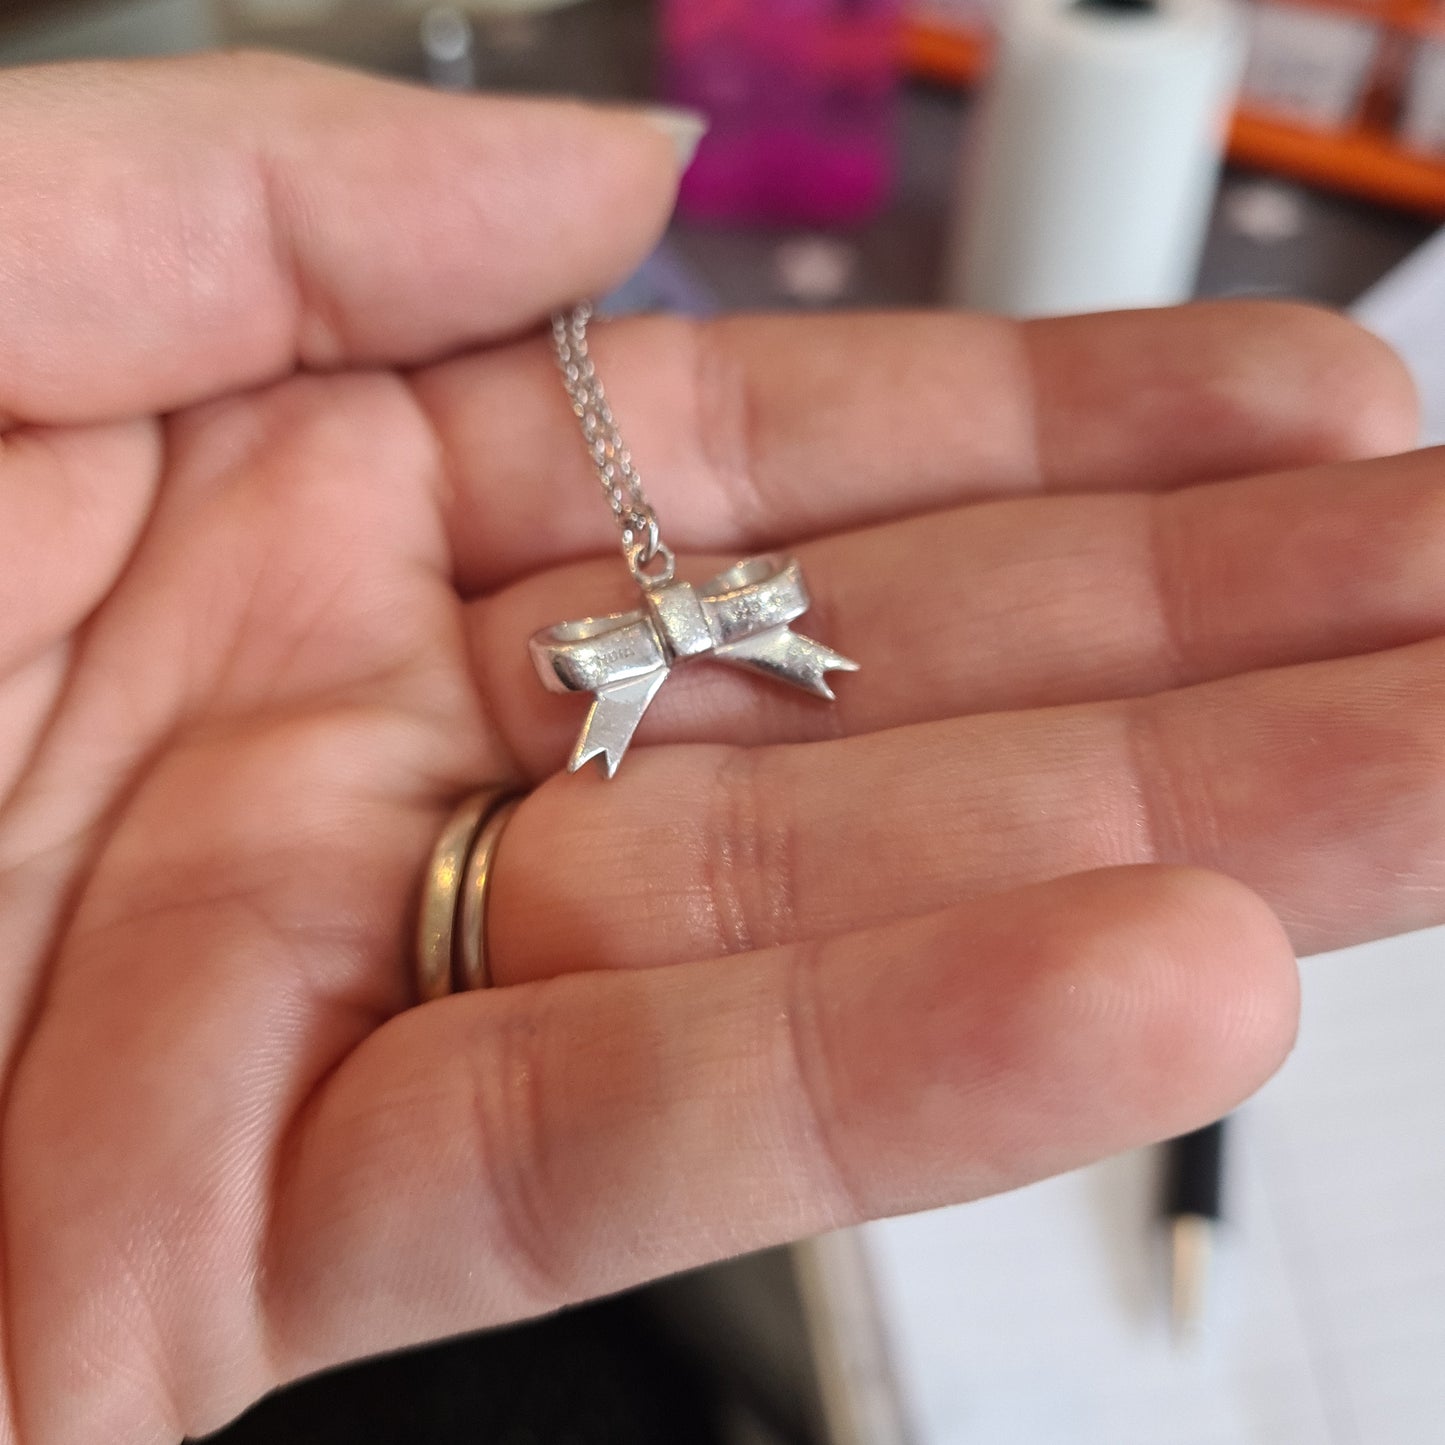 Genuine Hot Diamond Oversized Bow Necklace With Small CZ? Diamond? In the Middle